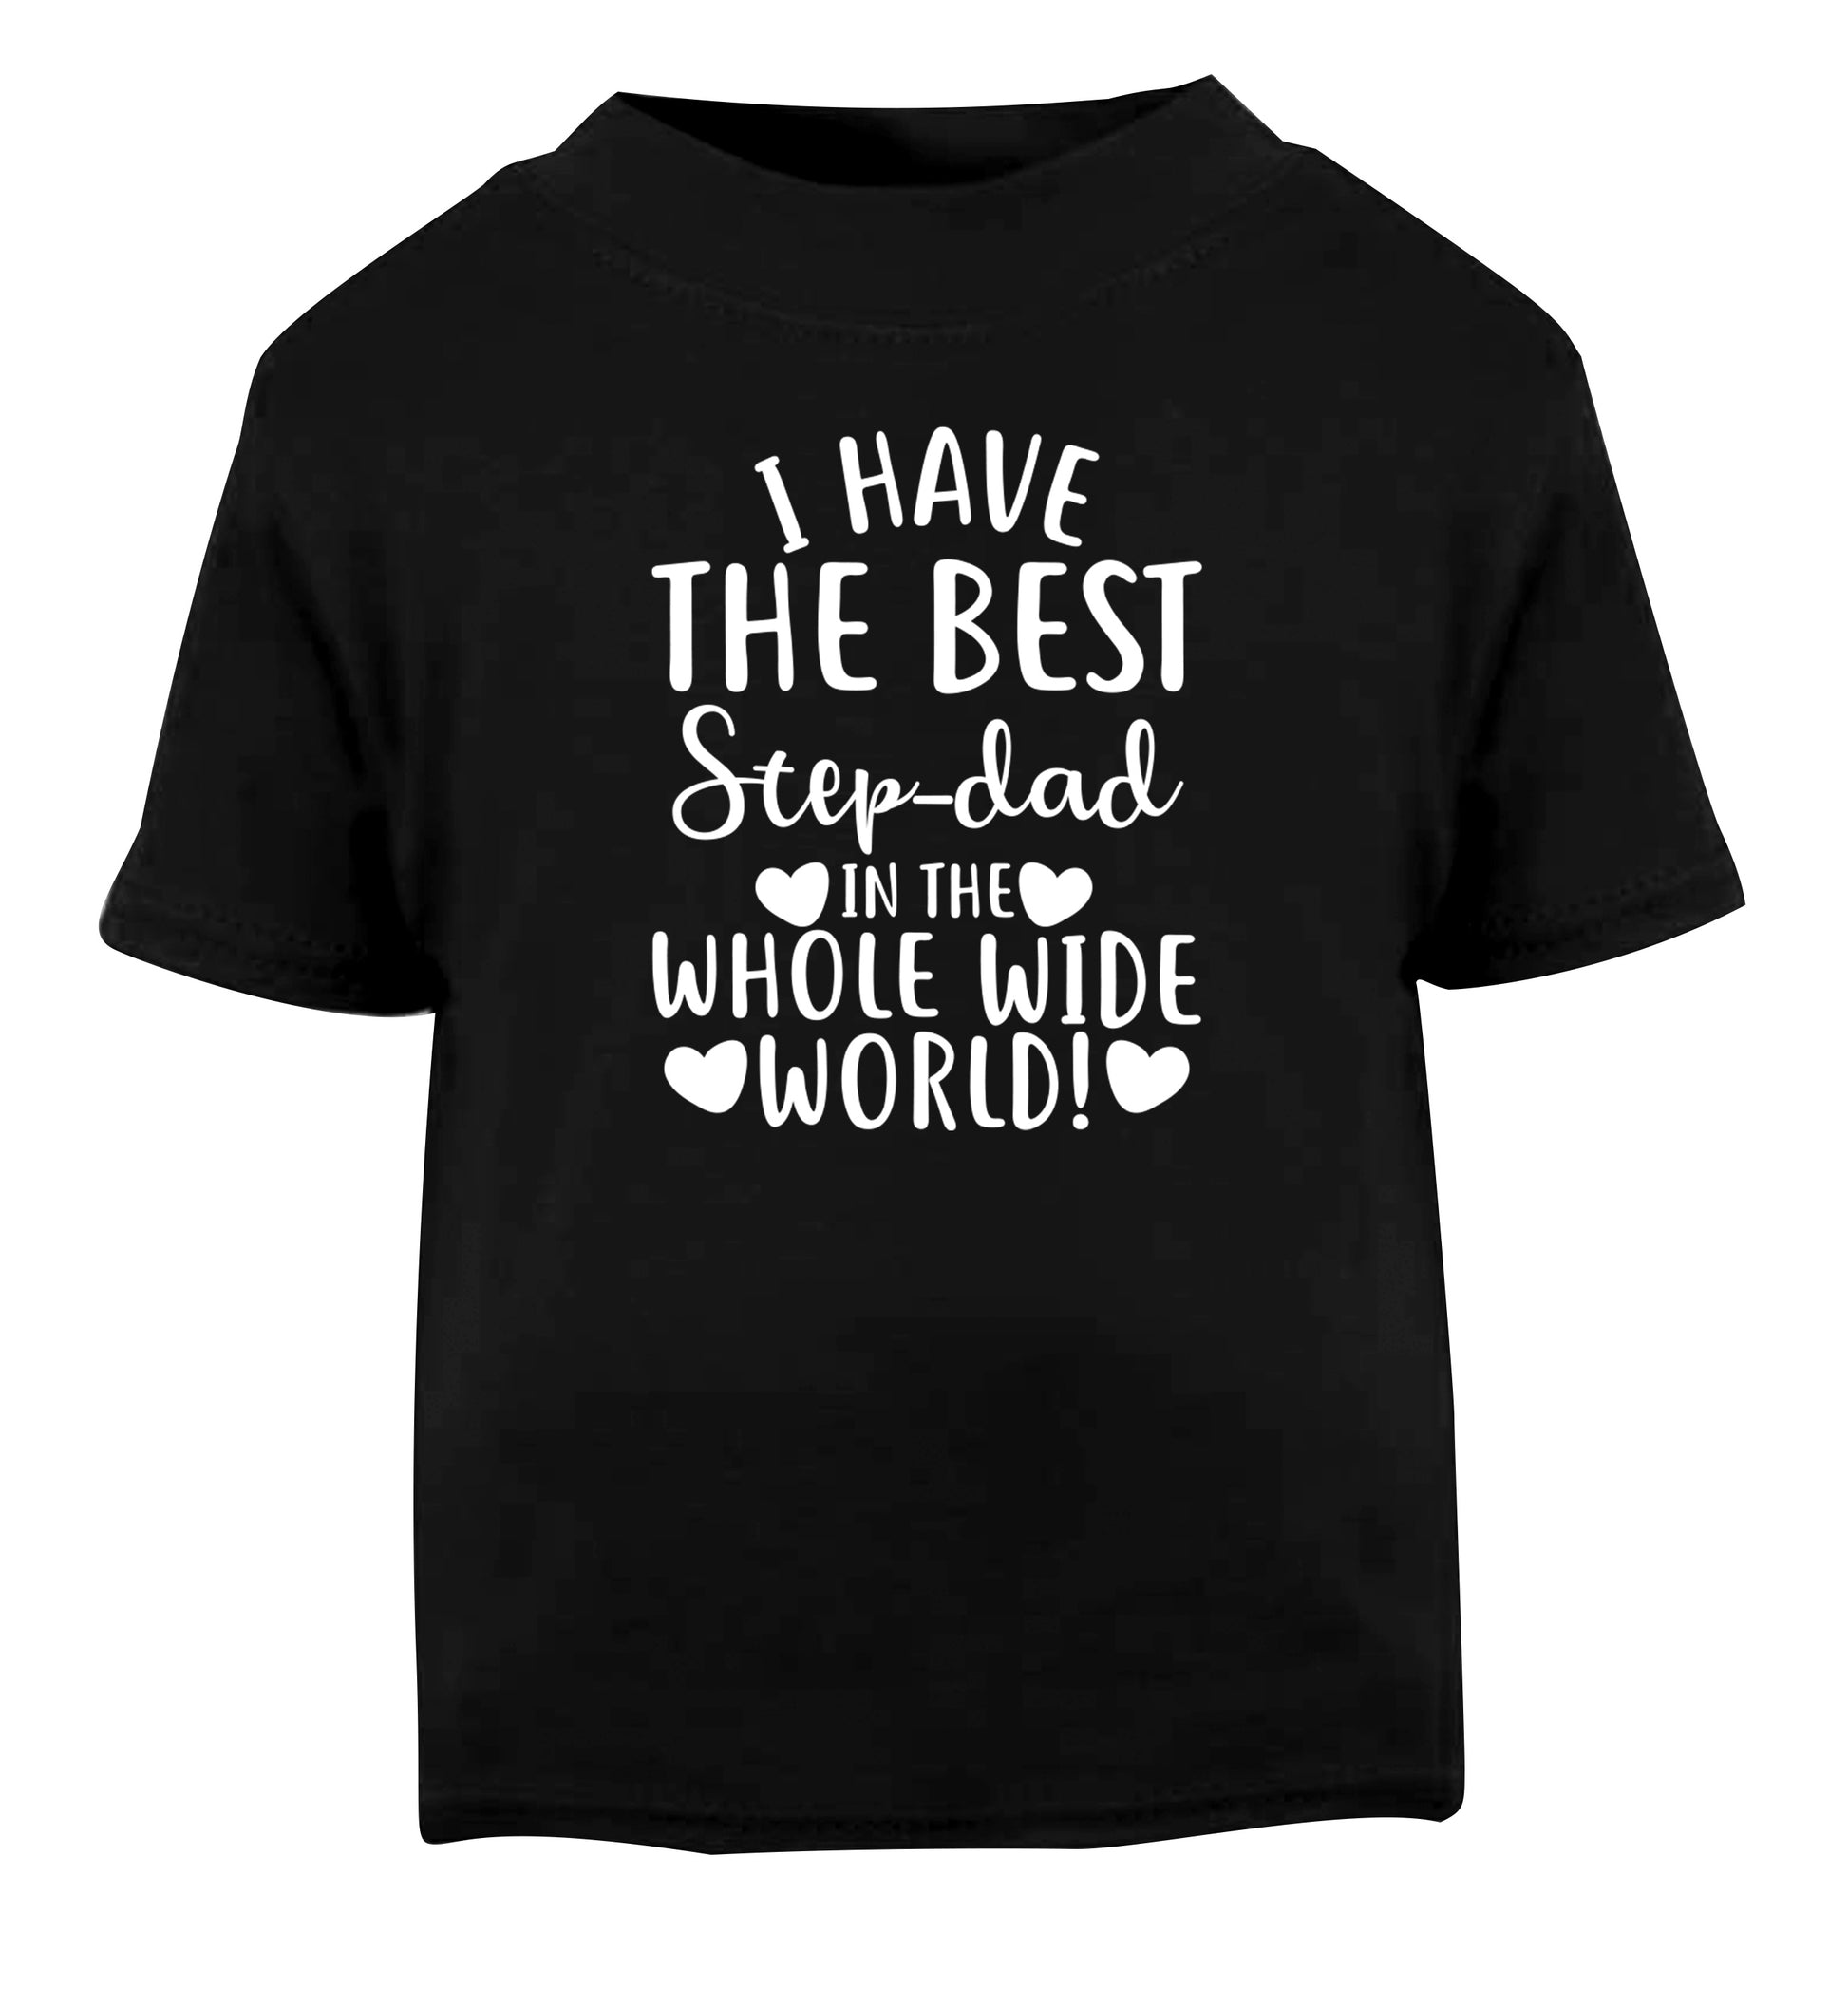 I have the best step-dad in the whole wide world! Black Baby Toddler Tshirt 2 years